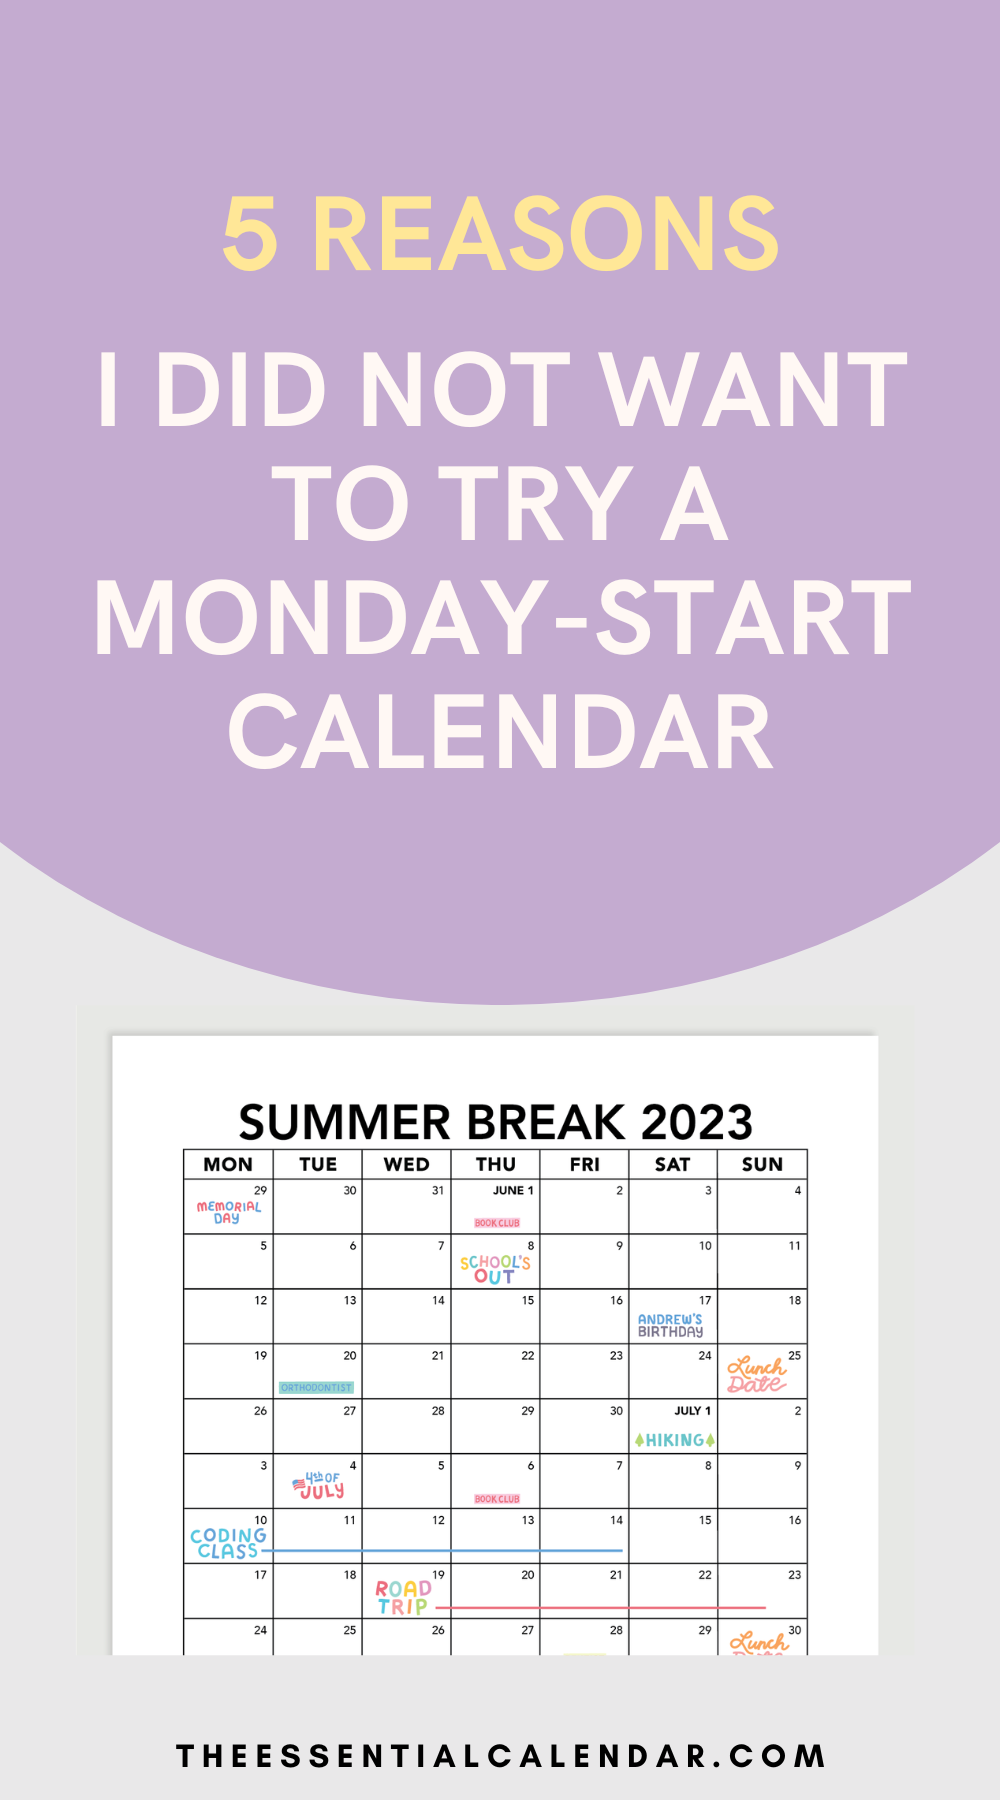 5 reasons why I did not want to try a Monday-start calendar